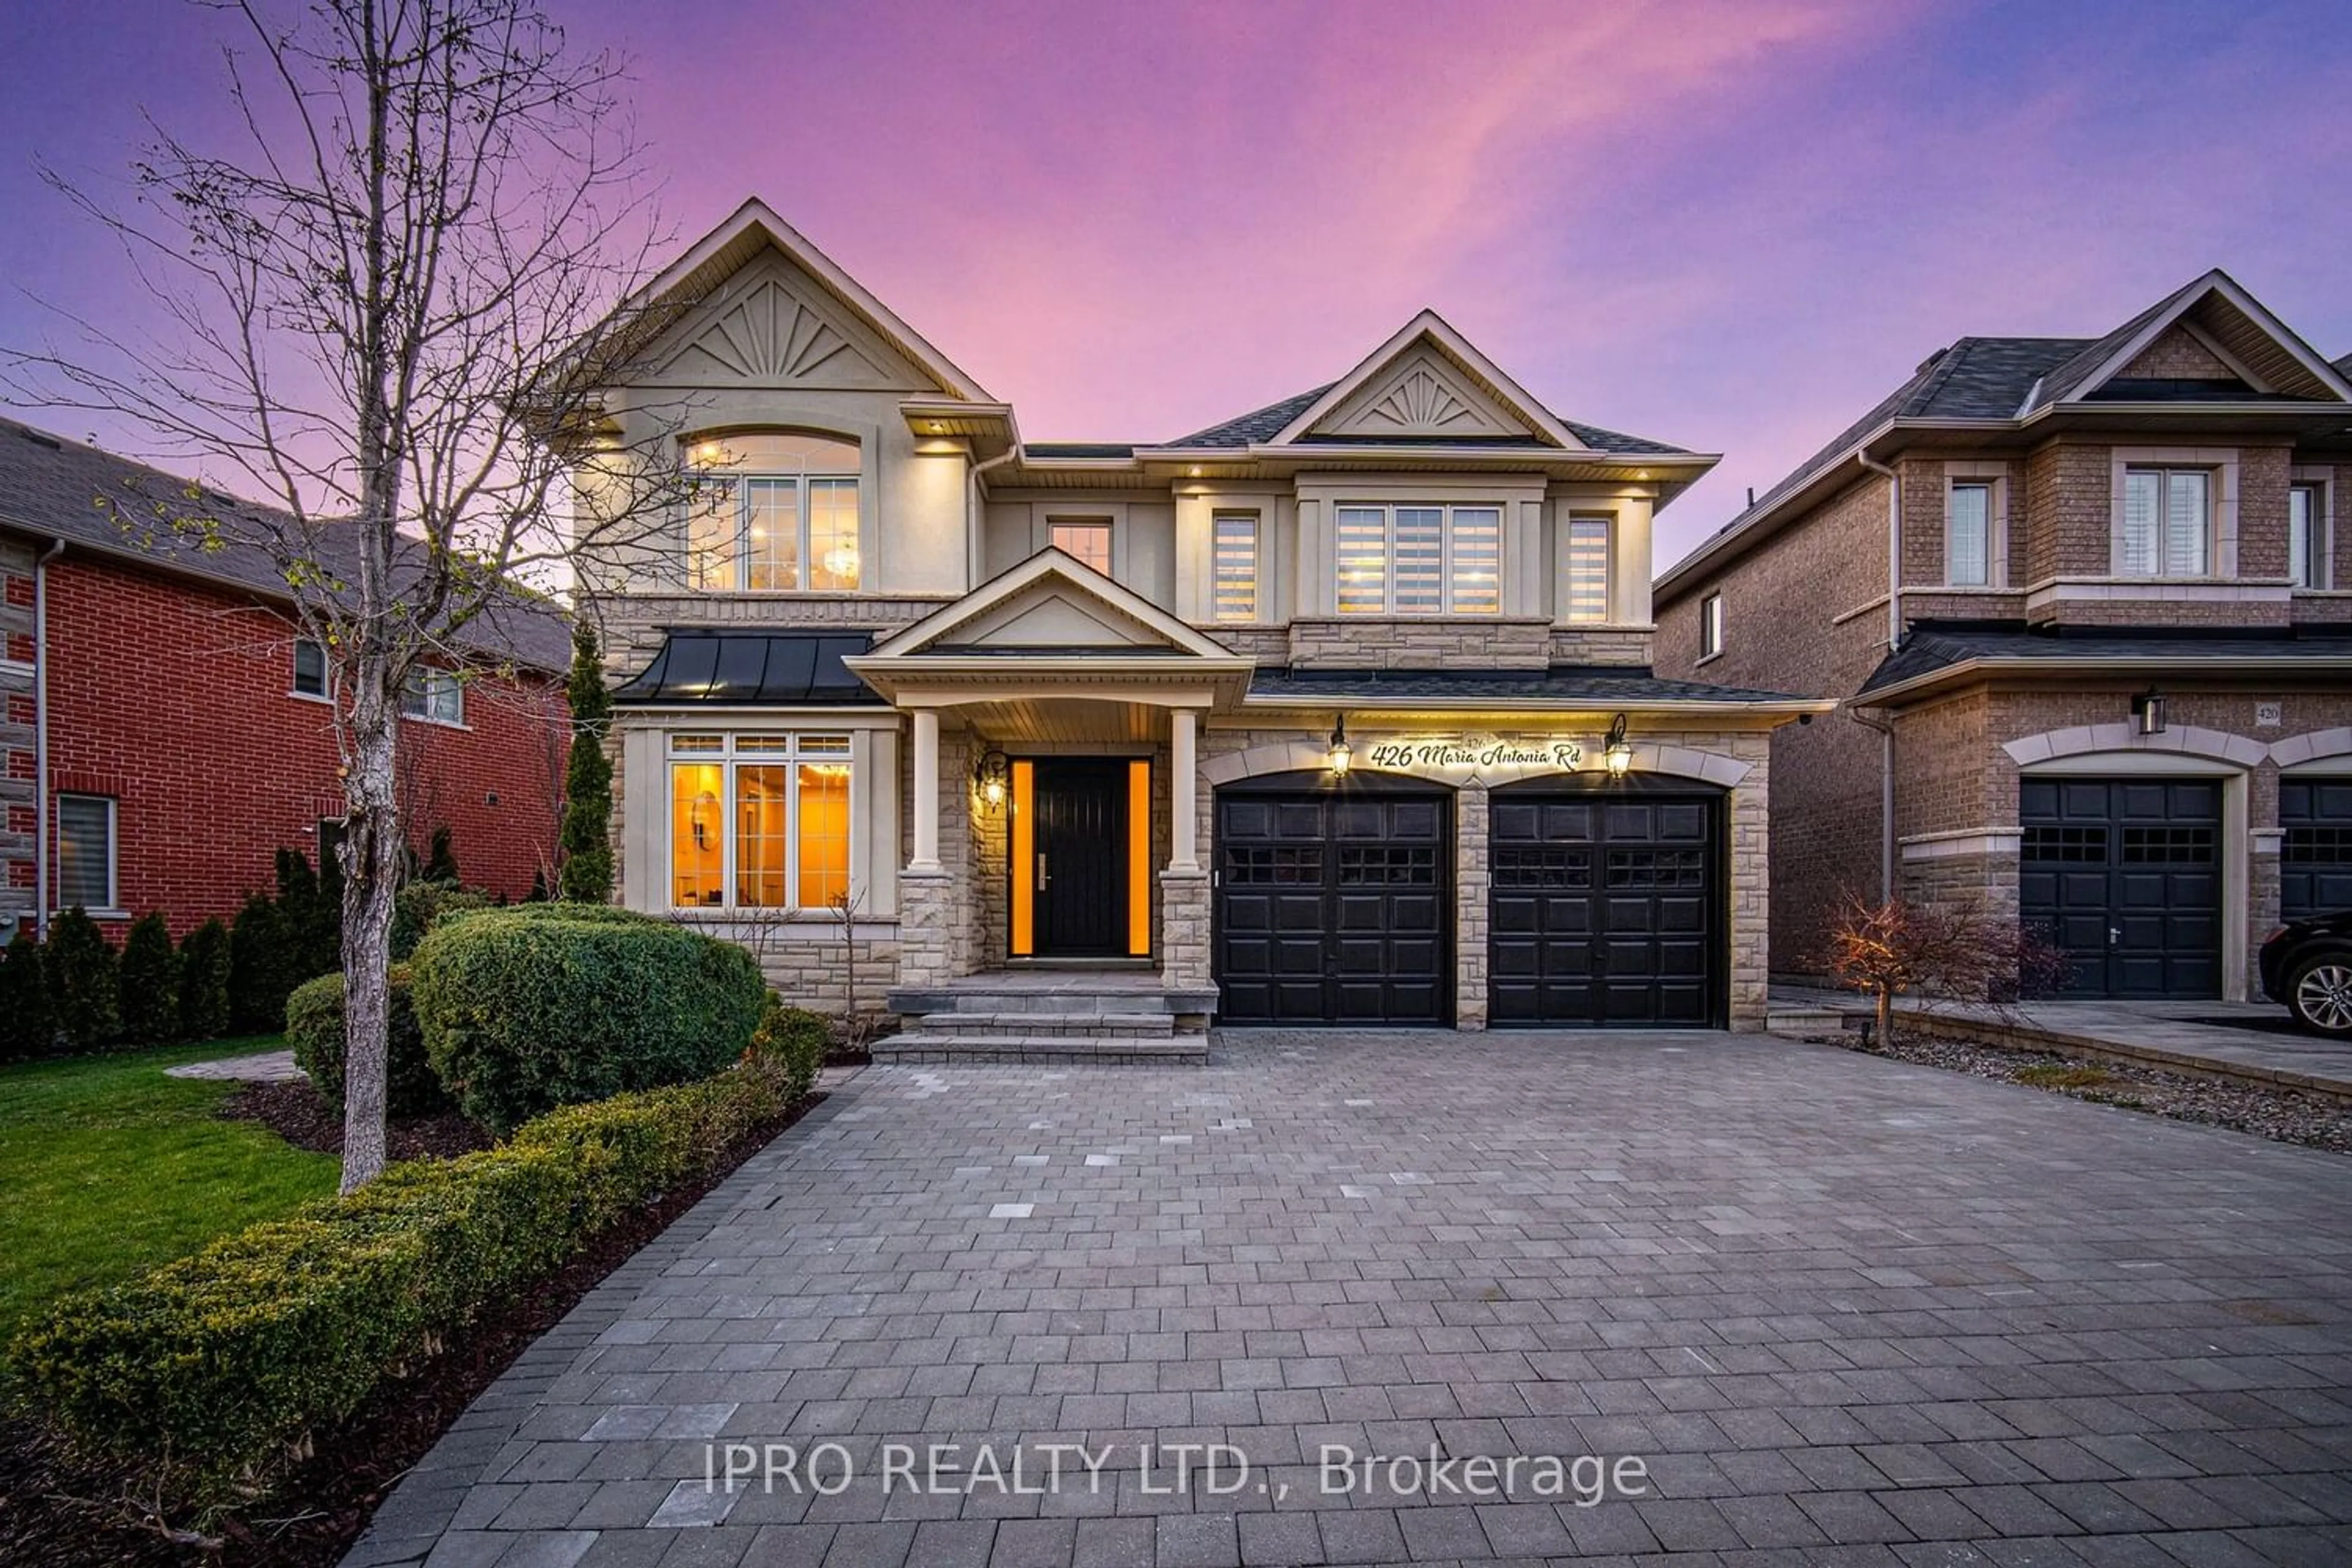 Home with brick exterior material for 426 Maria Antonia Rd, Vaughan Ontario L4H 0X5